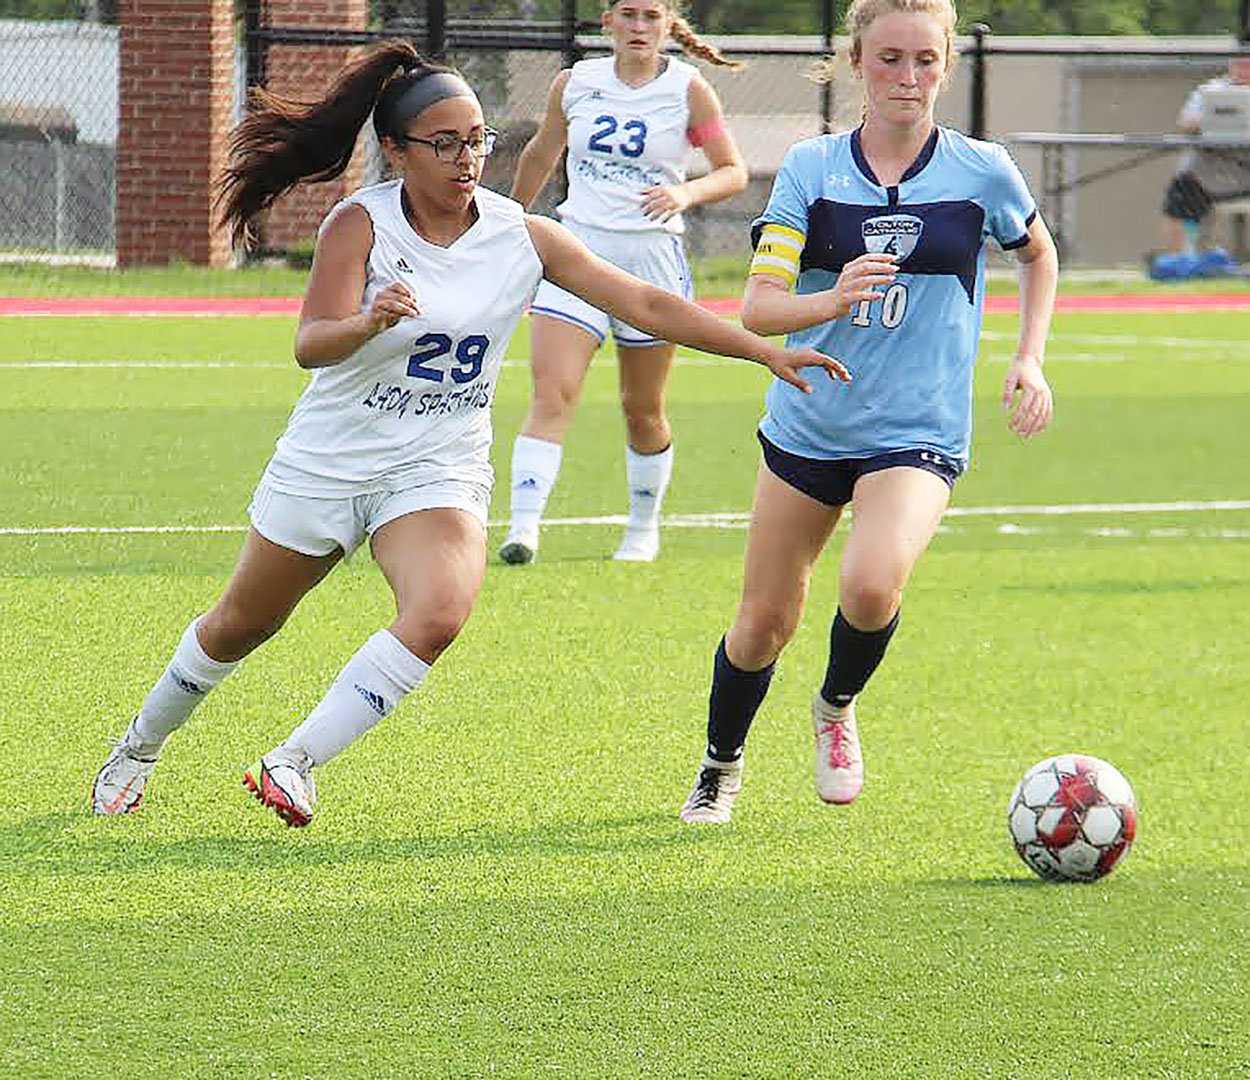 Moberly freshman defender Alexis Cooper attempts to clear the ball away from Father Tolton’s Macie Parmer during Tuesday’s Class 2 District 6 semifinal girls’ soccer game at Mexico High School.